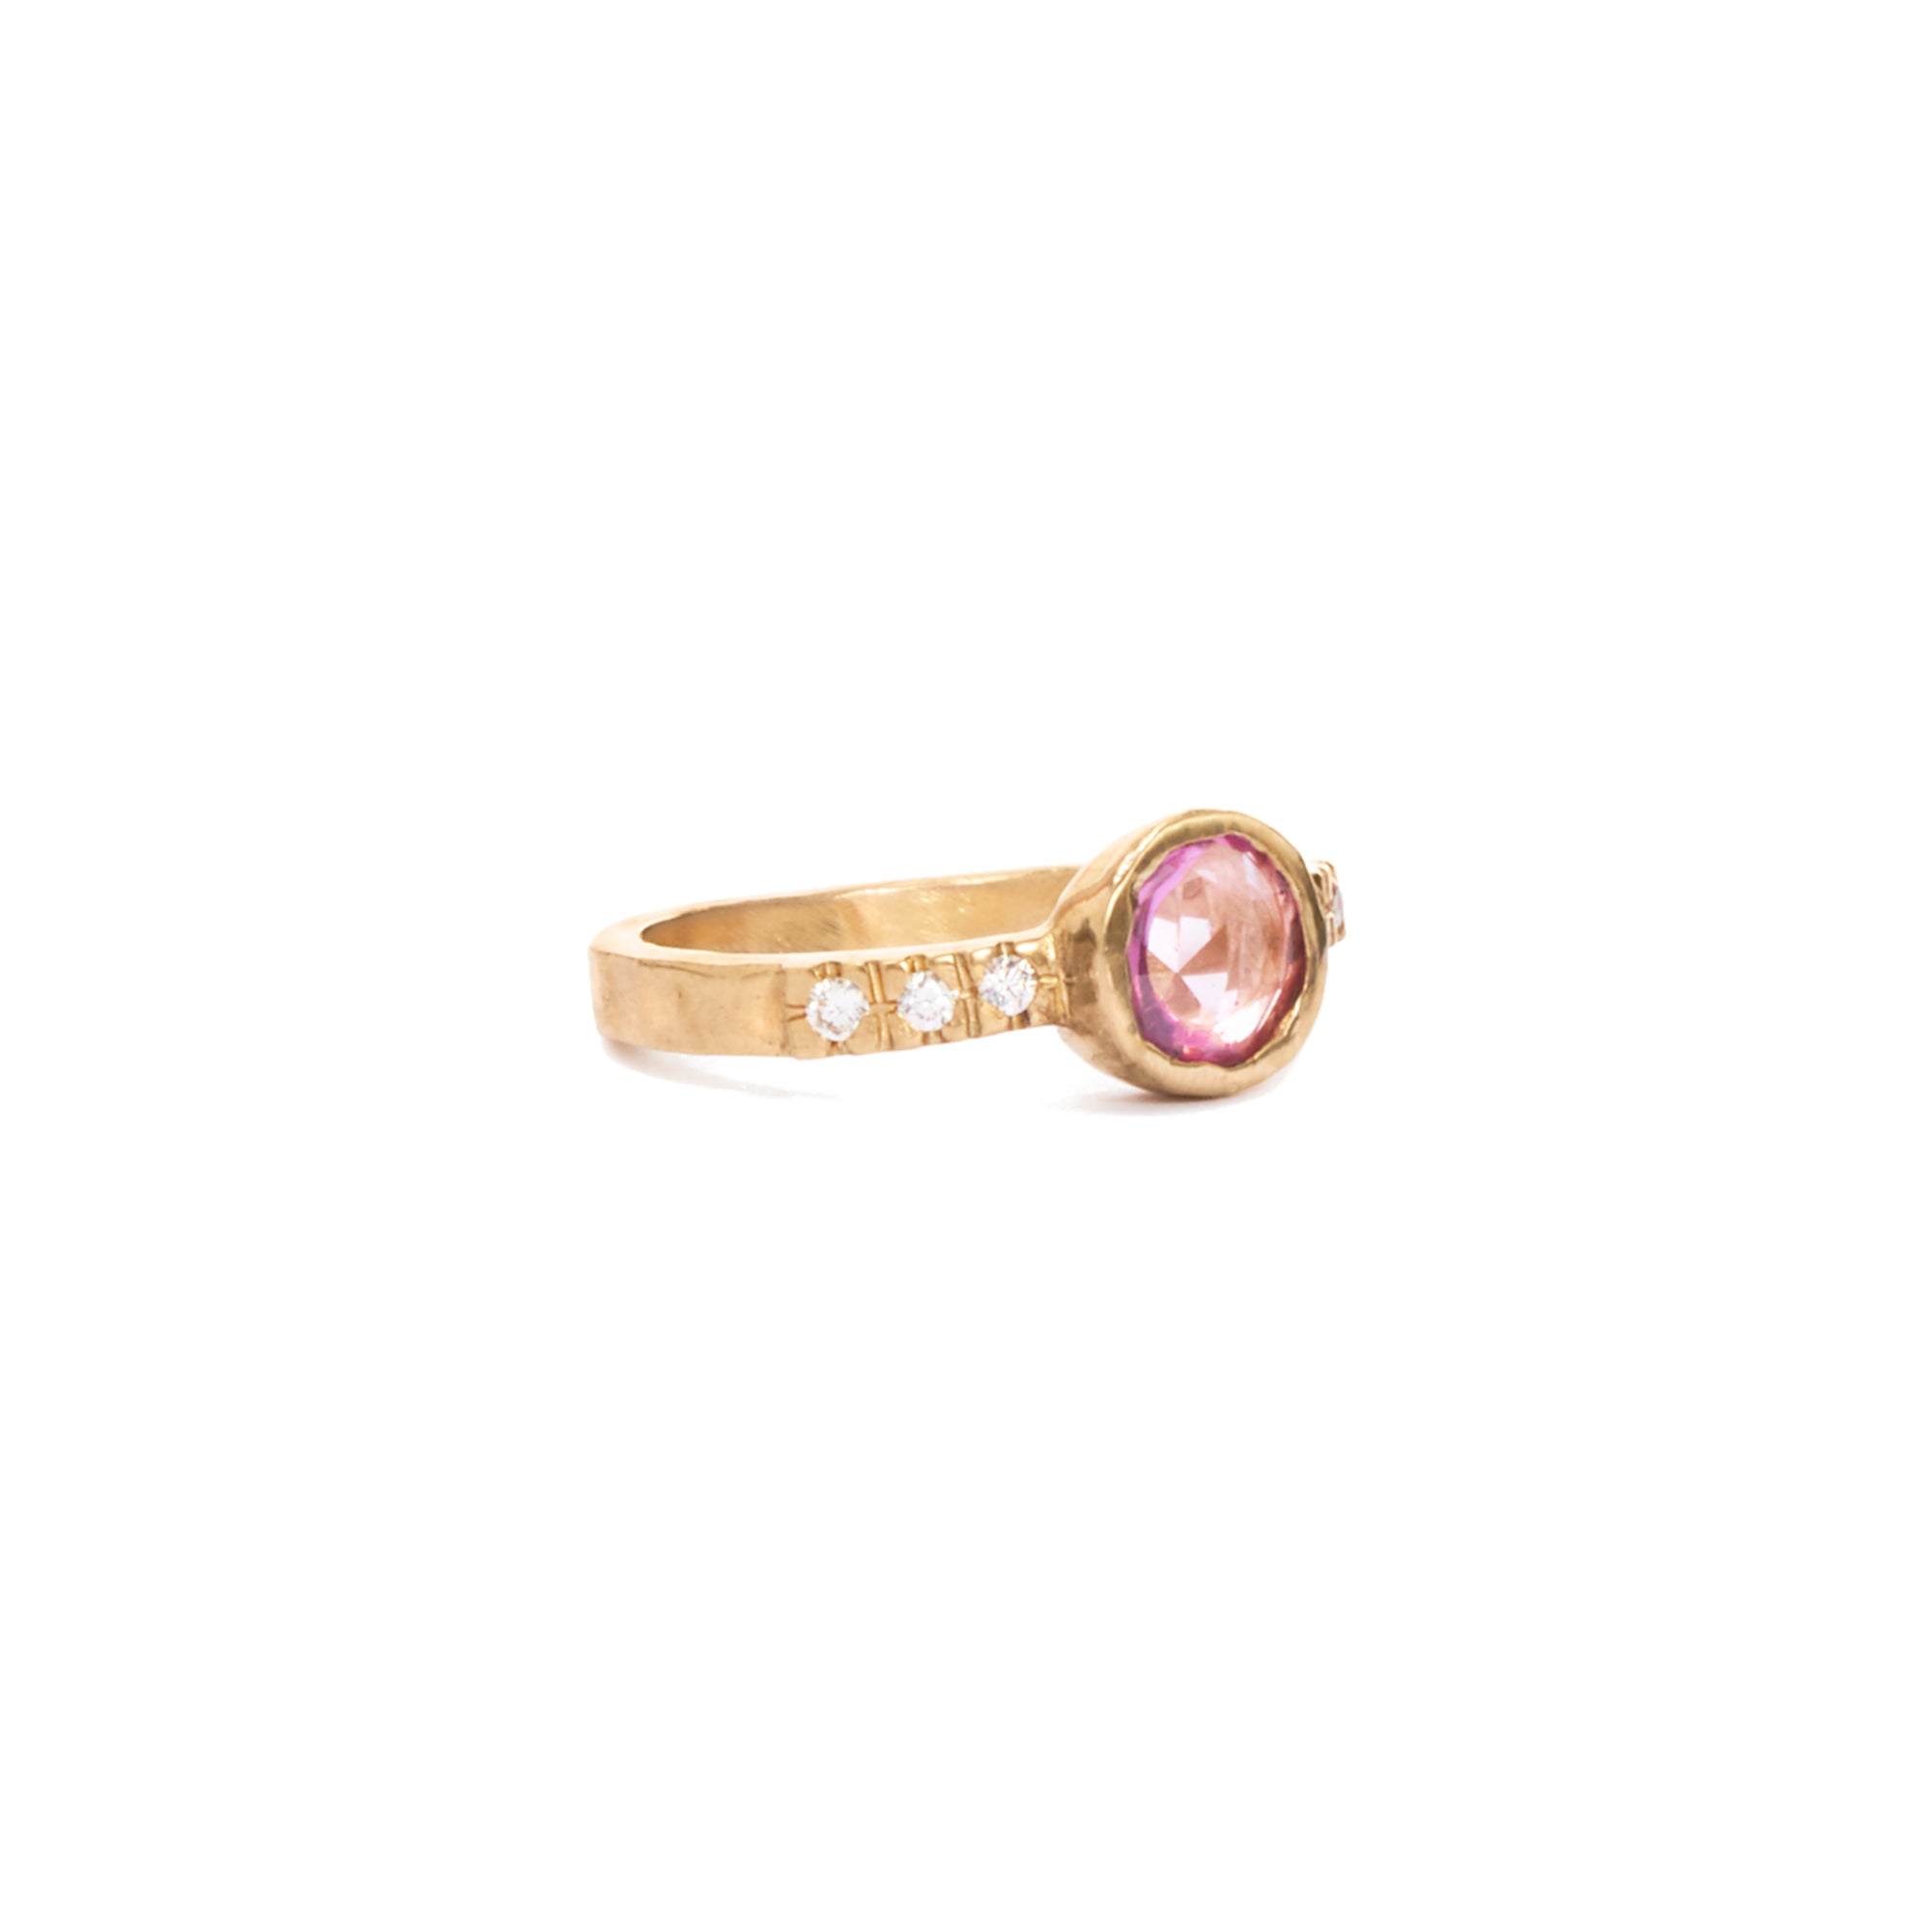 Our pink sapphire and white diamond solitaire is the perfect engagement ring for the alternative bride. 